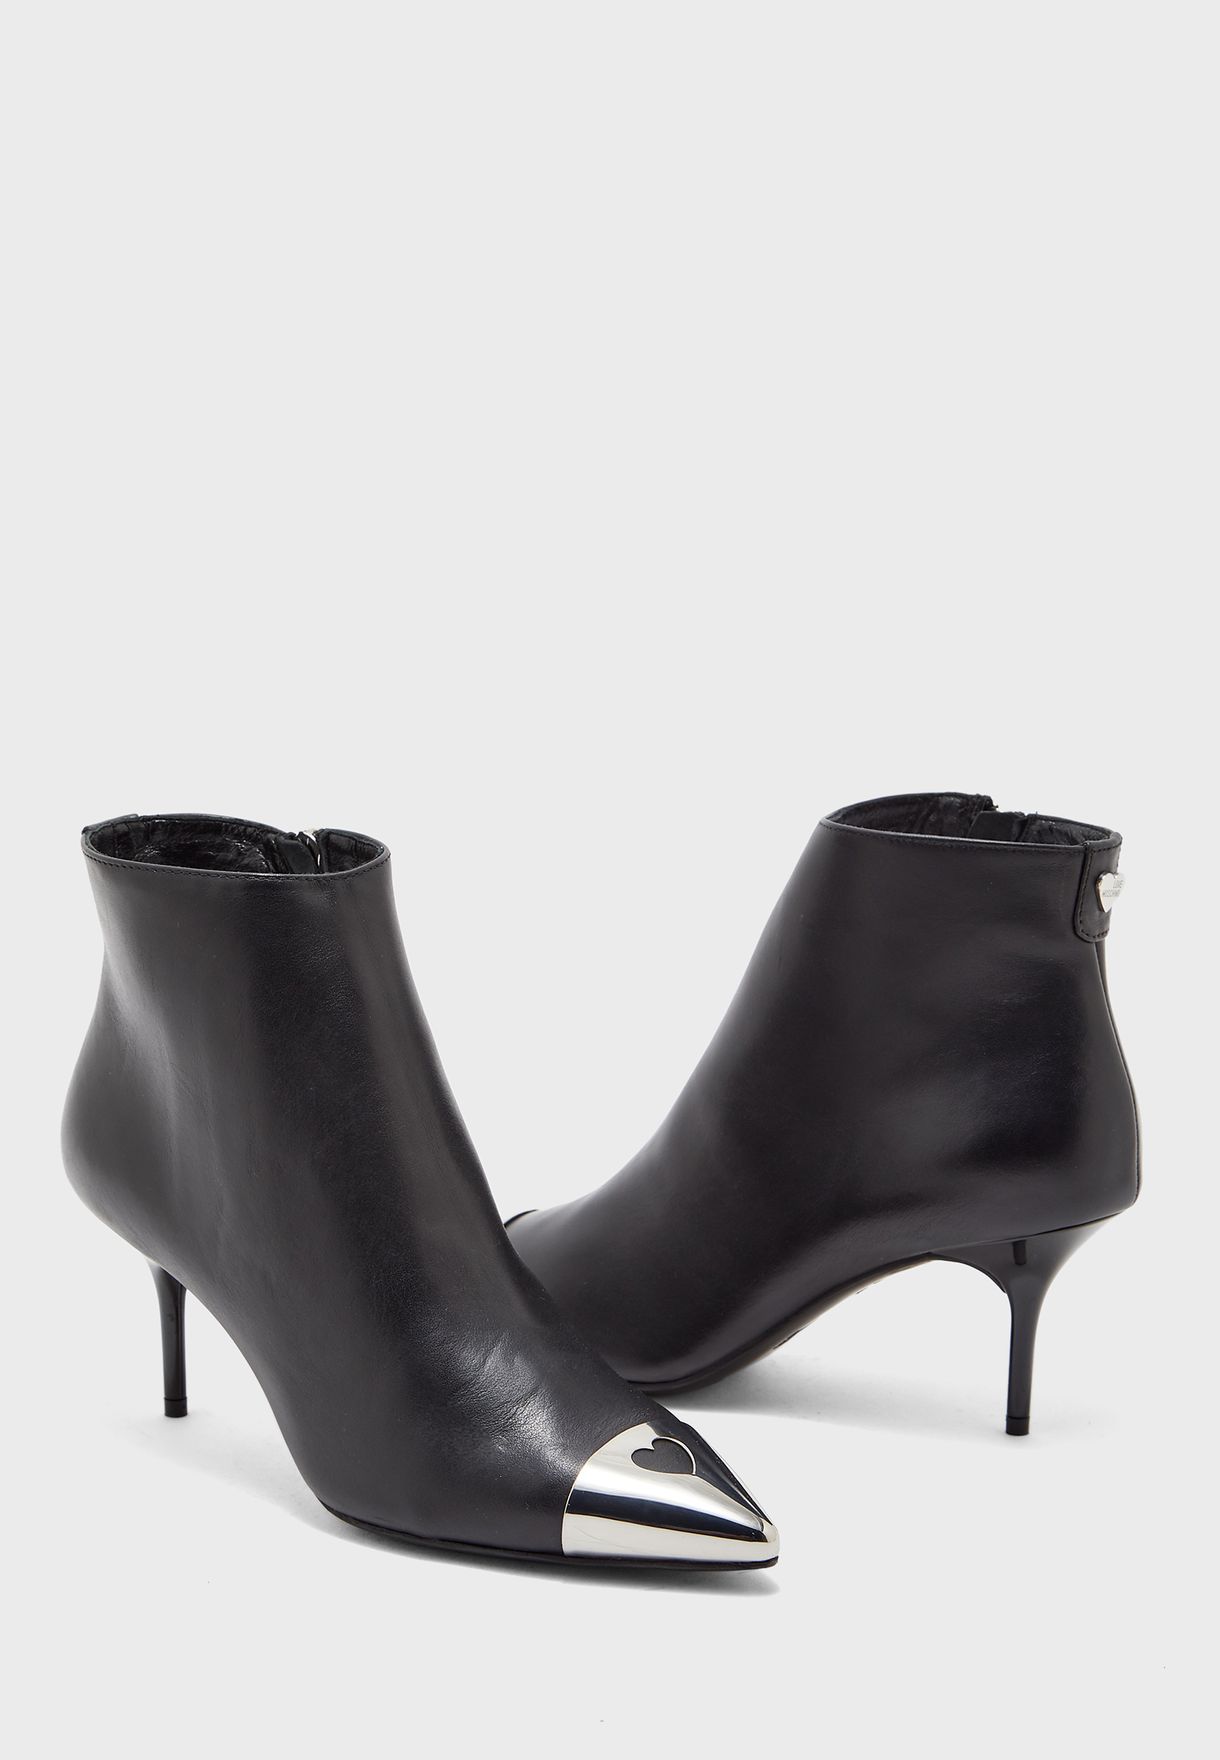 black low ankle boots